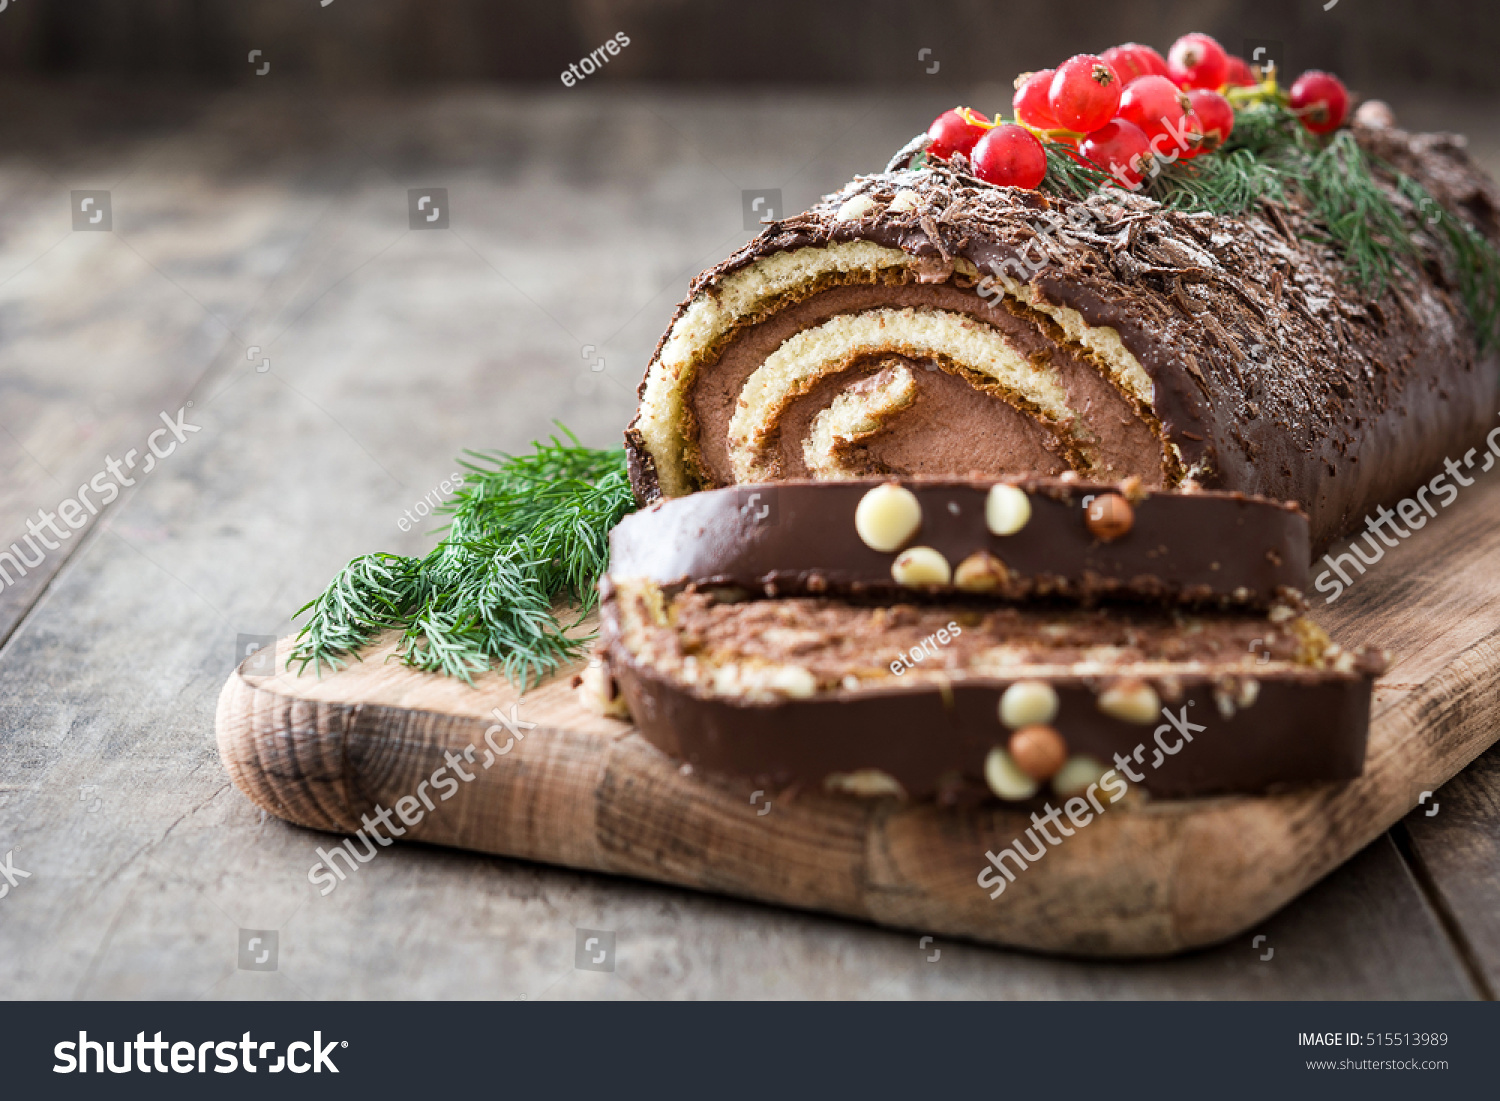 Chocolate yule log christmas cake with red currant on wooden background
 #515513989